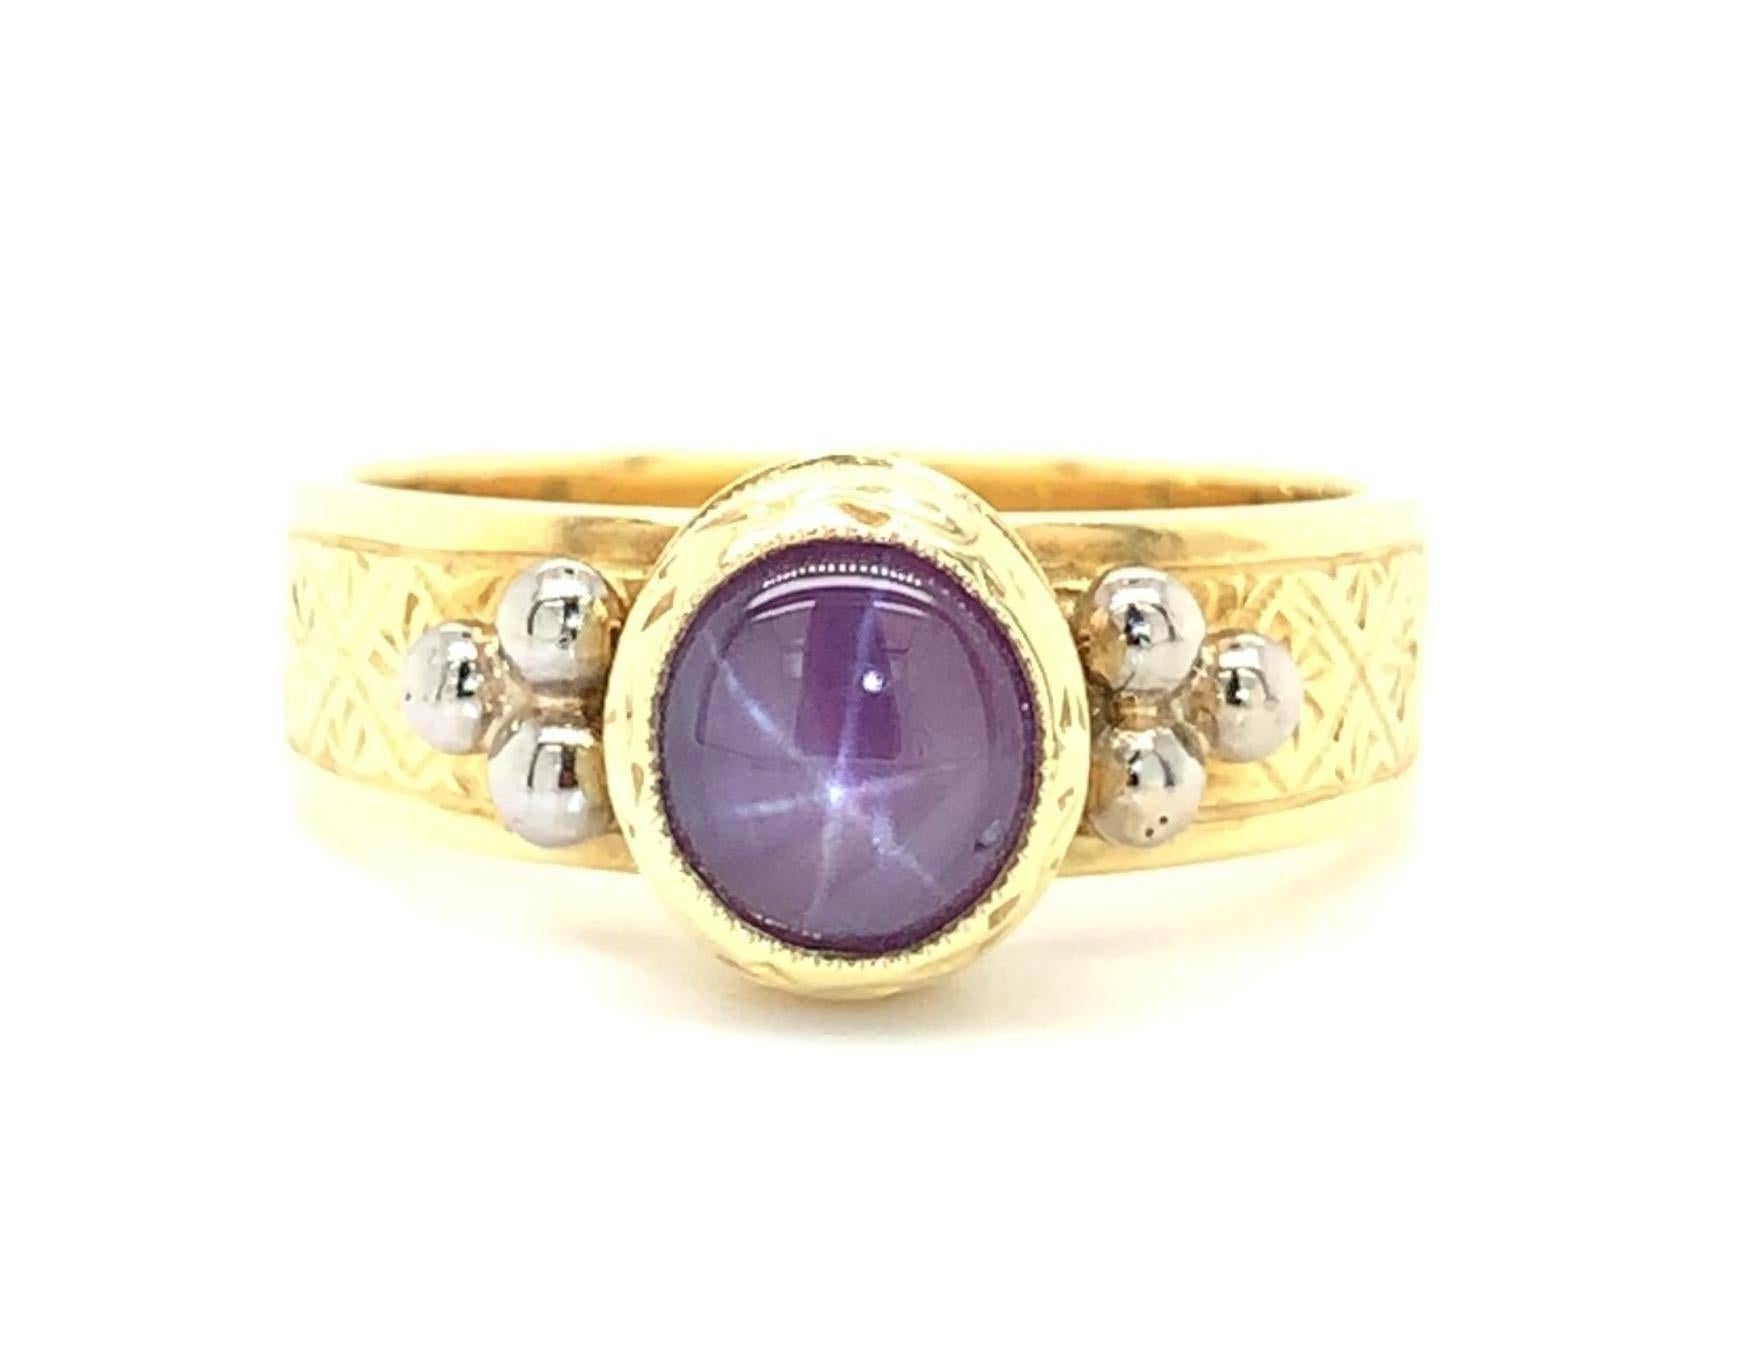 This original ring features a 1.48 carat star ruby cabochon set in a beautifully hand-engraved 18k yellow gold bezel. The ruby is a rich purplish red color and exhibits a lovely, well defined 6-rayed star. It is showcased in an intricately engraved